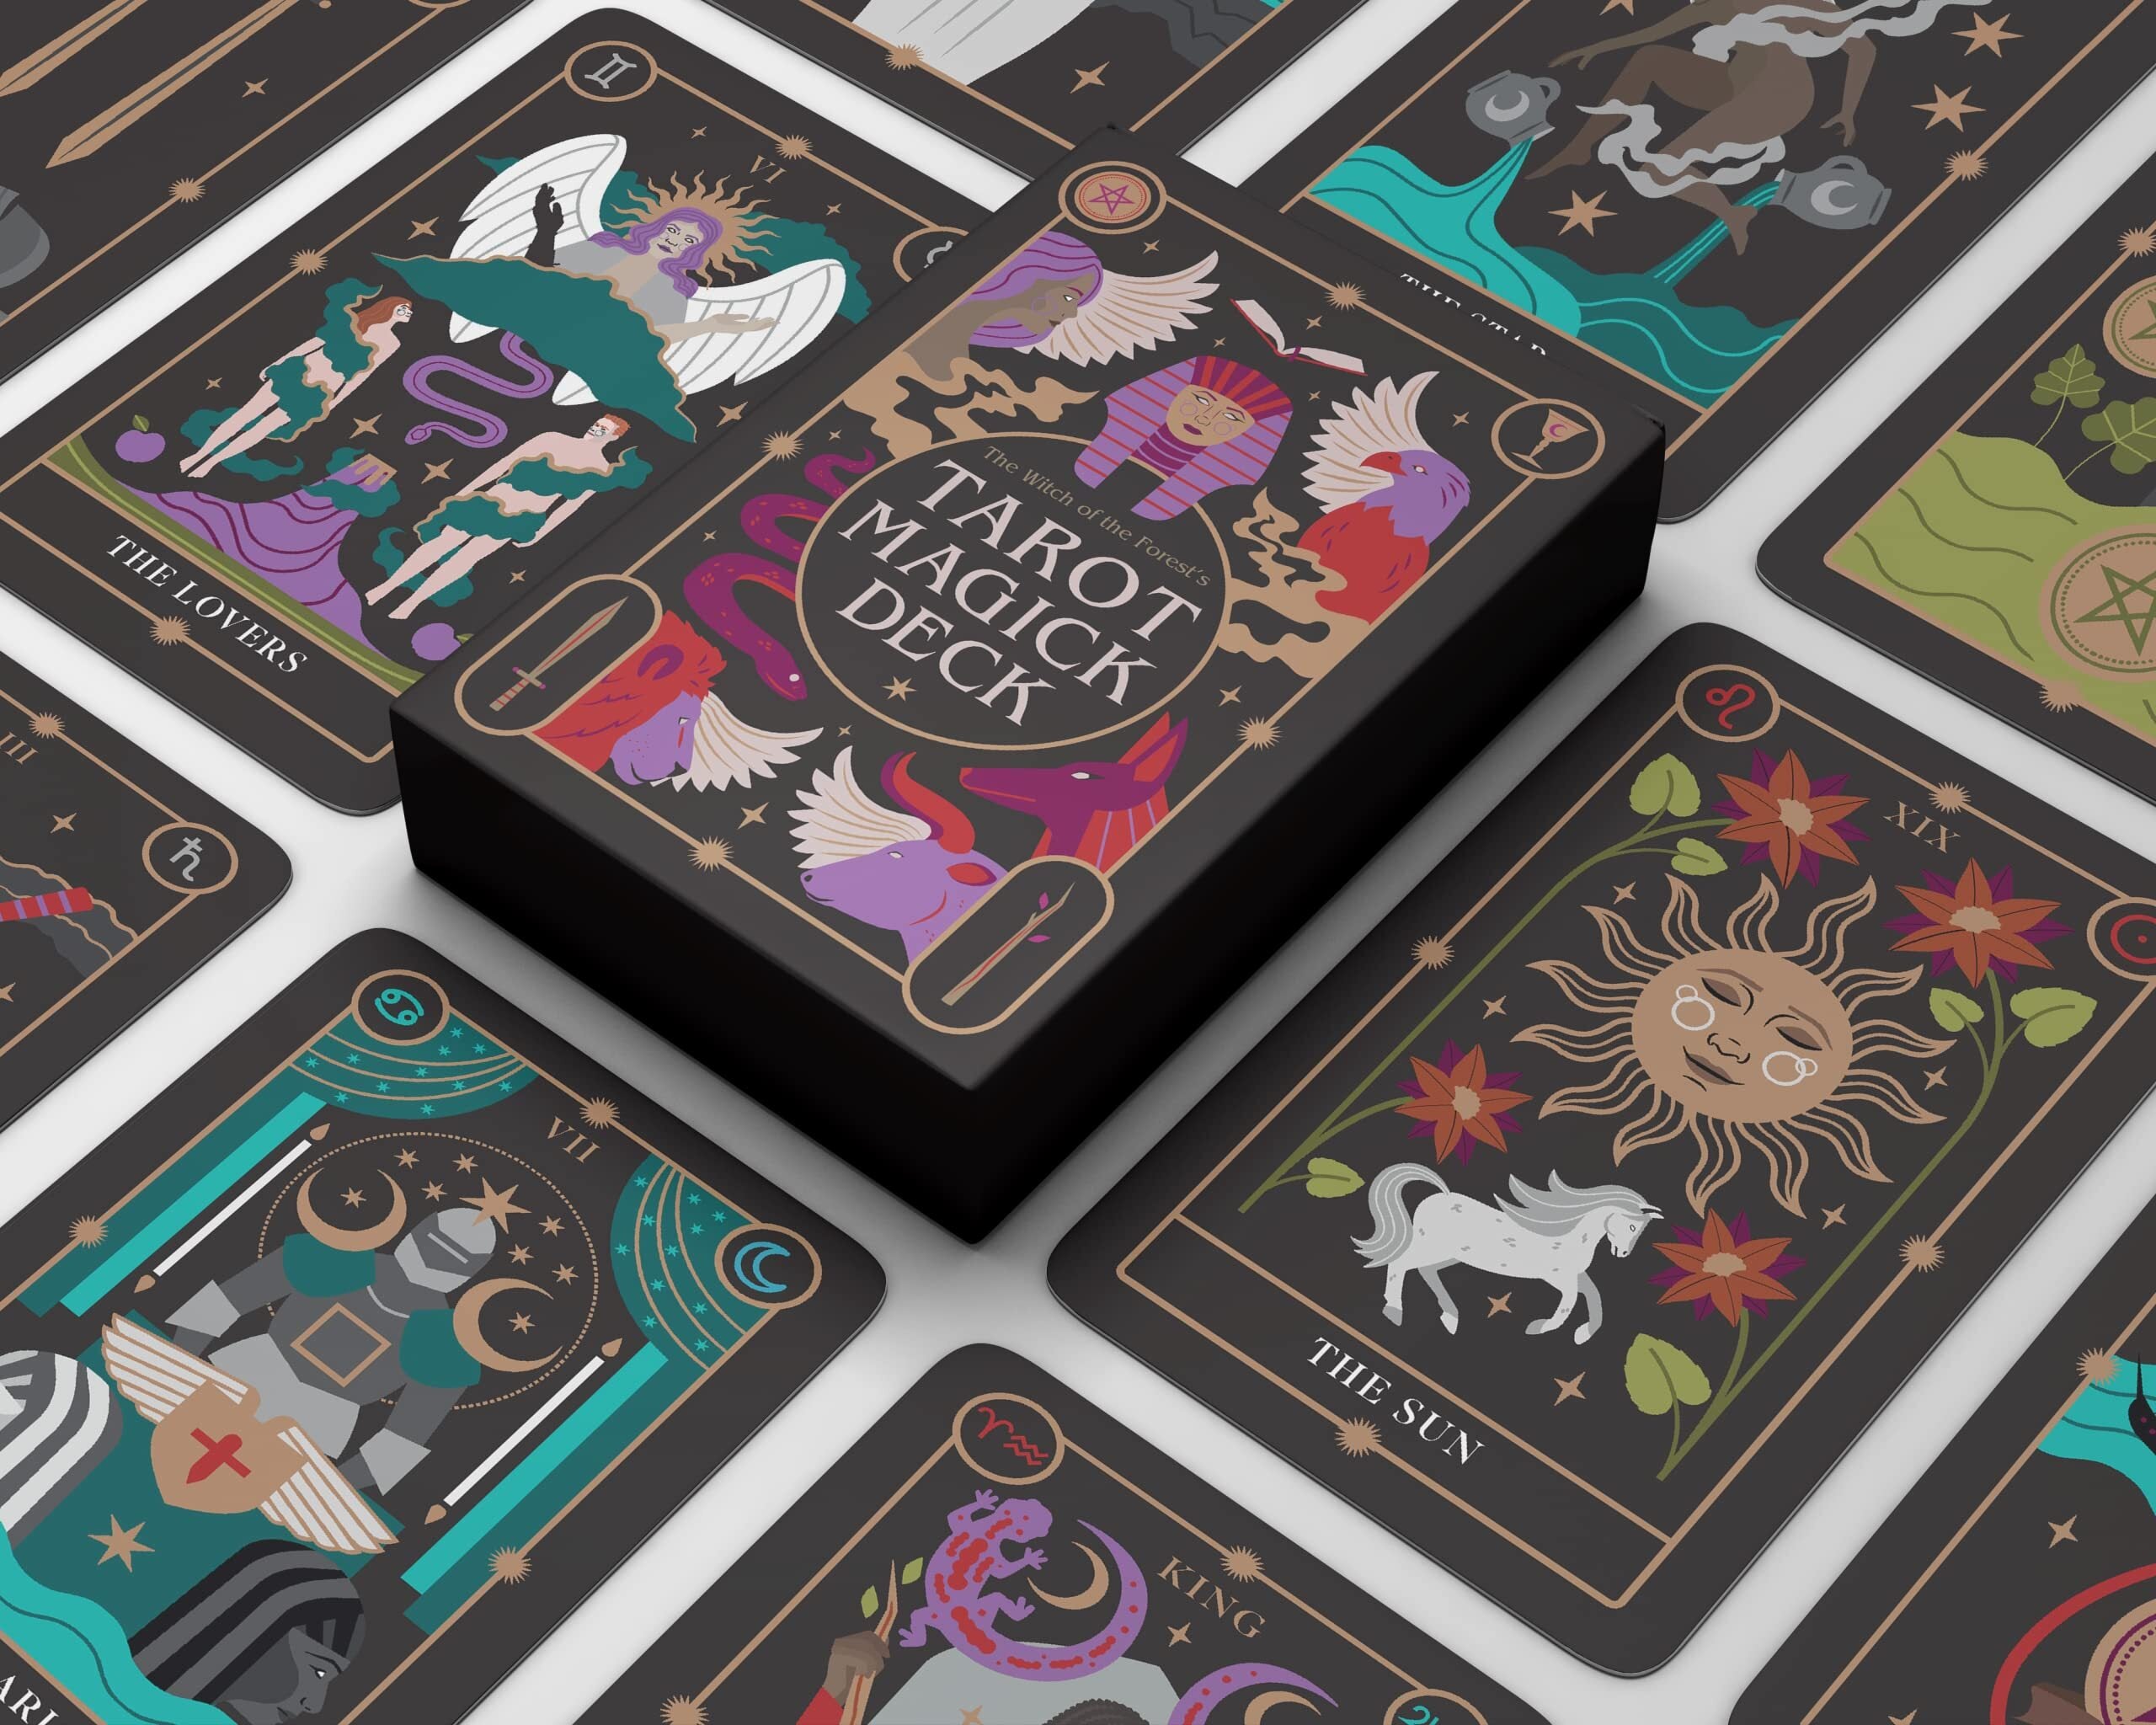 The Witch of the Forest's Tarot Magic Deck